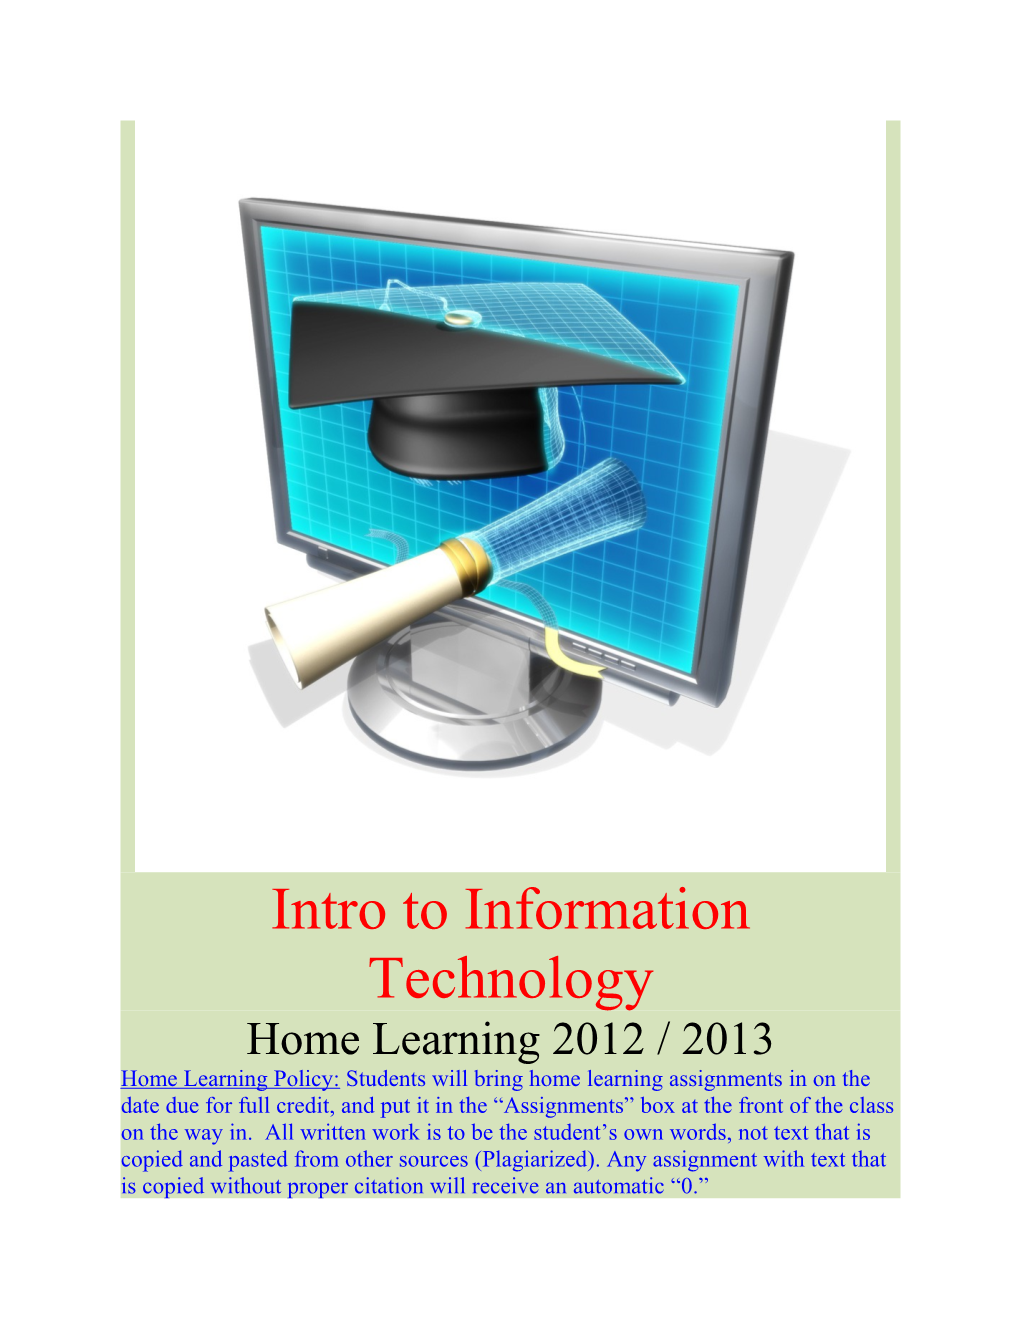 Intro to Information Technology